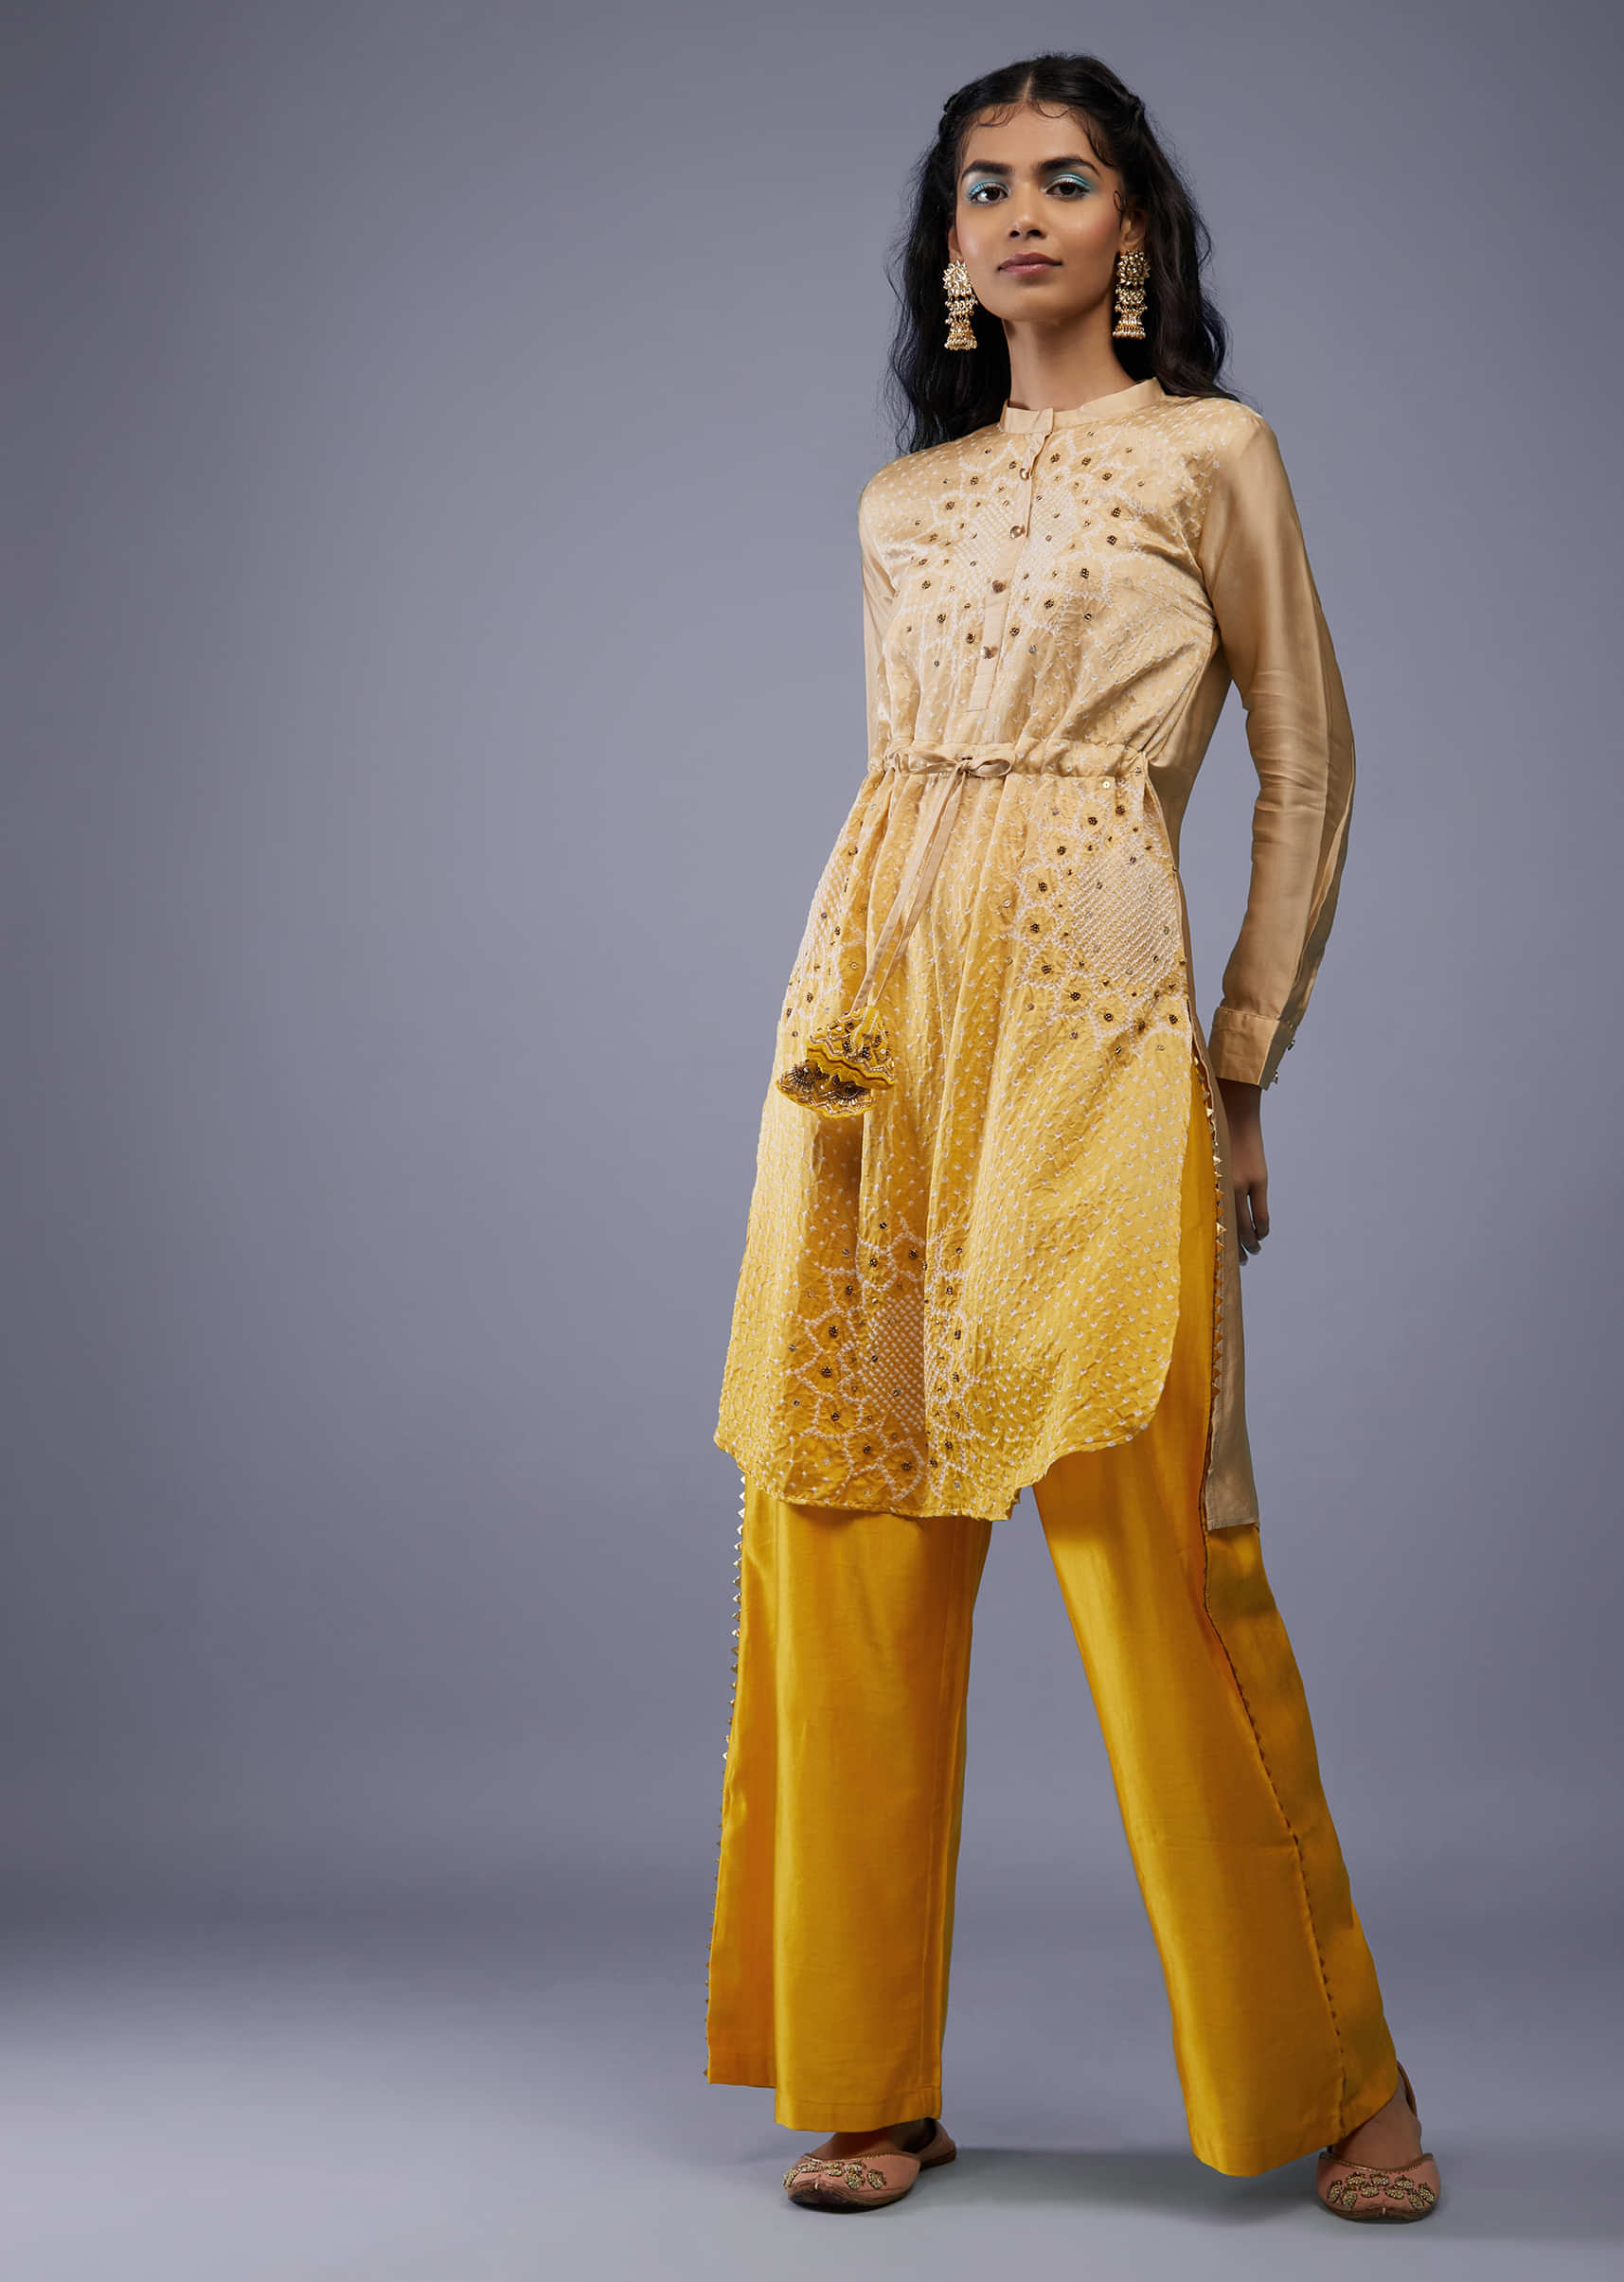 Ombre Shaded Champagne Brown And Cyber Yellow Gajji Silk Bandhani Top With Cotton Silk Palazzo